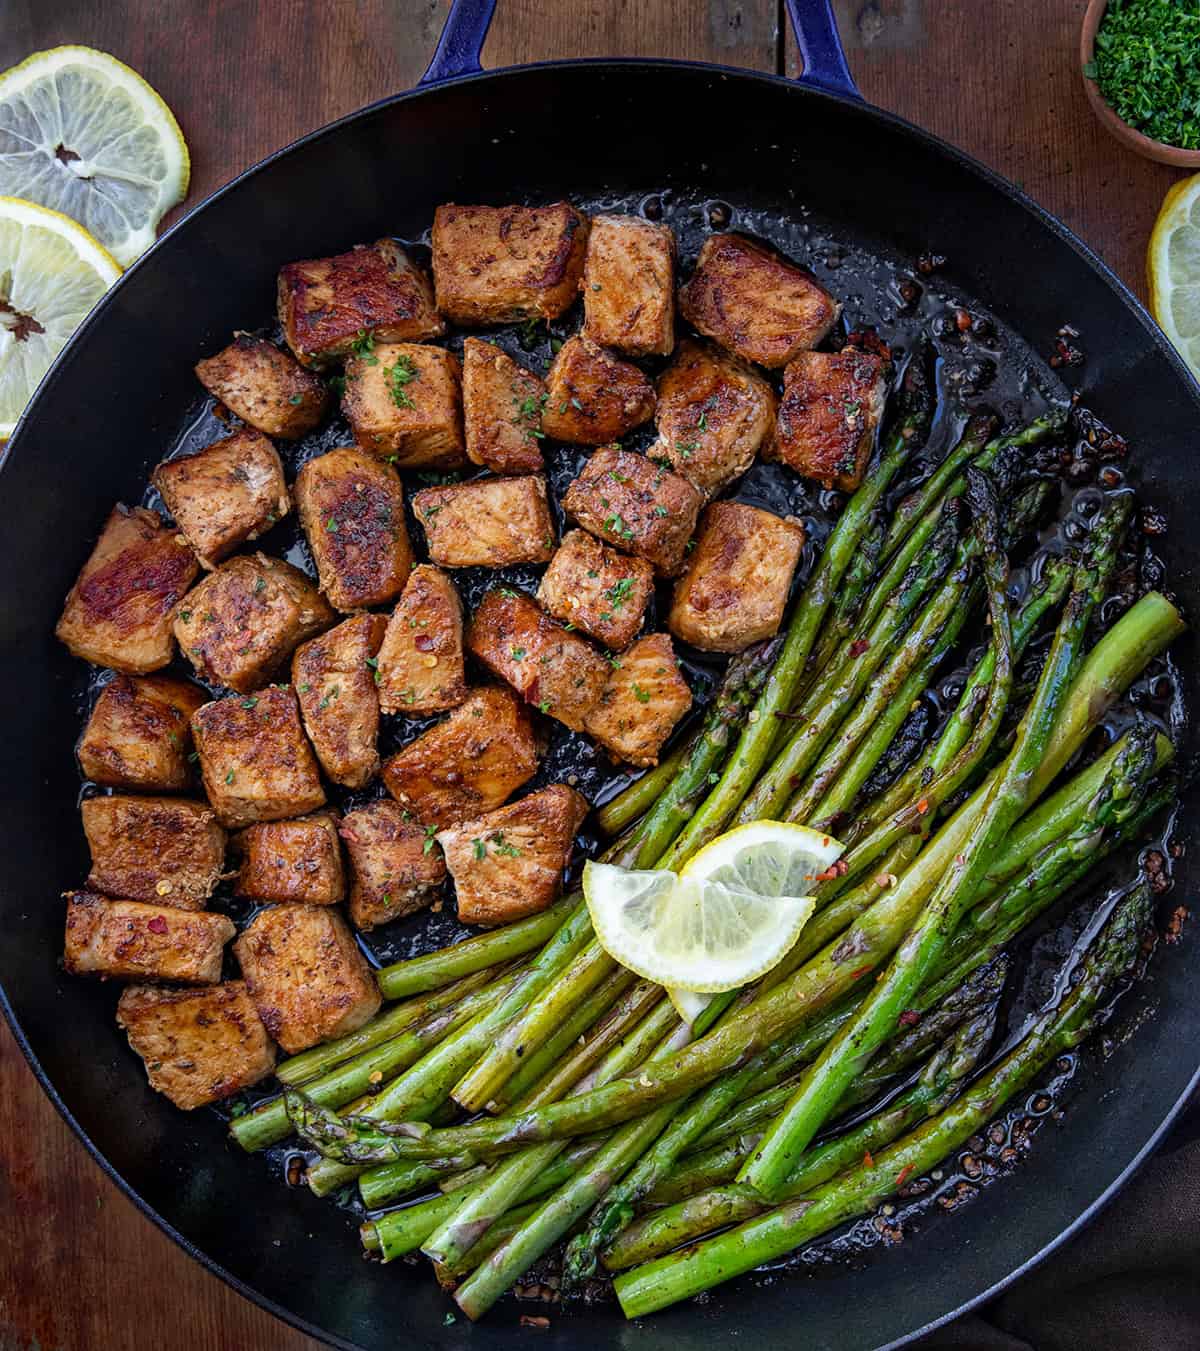 Skillet filled with Blackened Pork Bites and Asparagus on a wooden table from overhead.